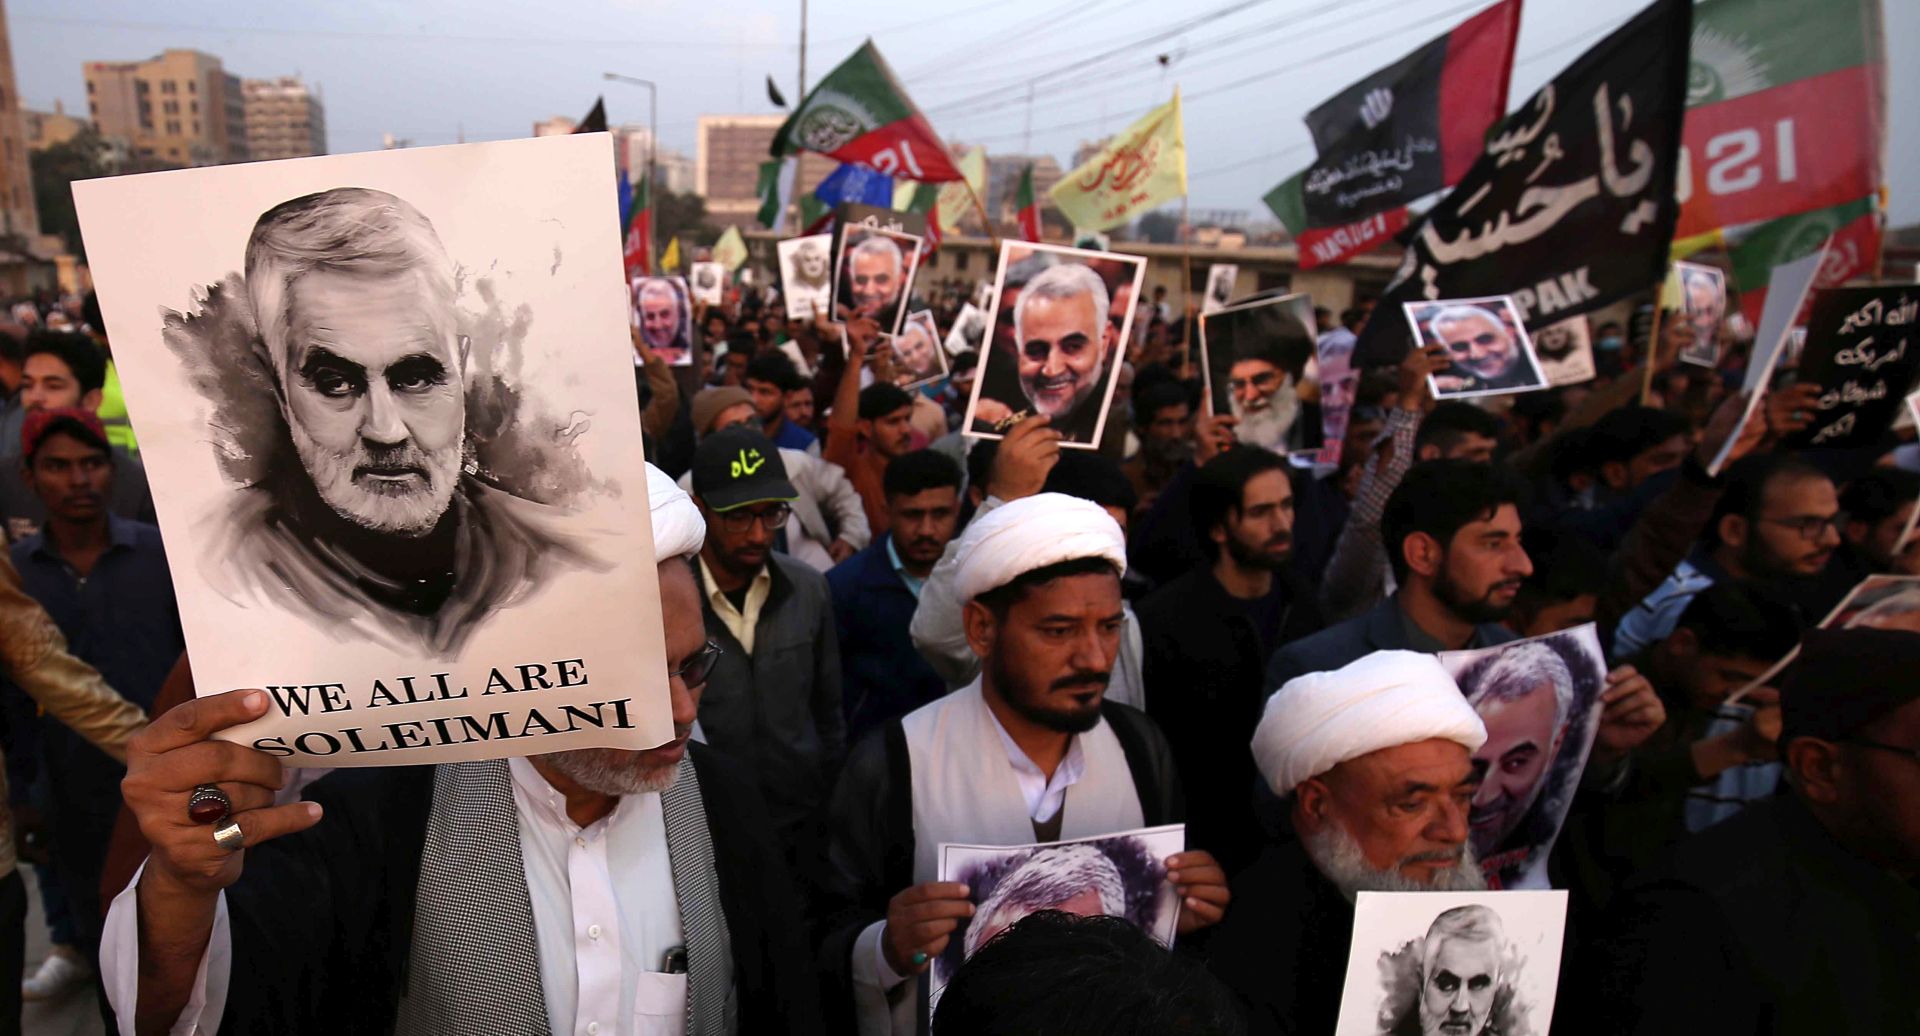 epa08104832 Pakistani Shiite Muslims hold pictures of General Qasem Soleimani, the head of Iran's Islamic Revolutionary Guard Corps' elite Quds Force, during a protest against the USA, in Karachi, Pakistan, 05 January 2020. General Qasem Soleimani, was killed in an airstrike on 03 January, in Baghdad ordered by the United States president, the Pentagon said. General Soleimani was in charge of Iran's foreign policy strategy as the head of the Quds Force, an elite wing of the Islamic Revolutionary Guard Corps, which the US designated as a terror organization. The Quds Force holds sway over a raft of Shia militias across the region, from Lebanon to Syria and Iraq.  EPA/SHAHZAIB AKBER